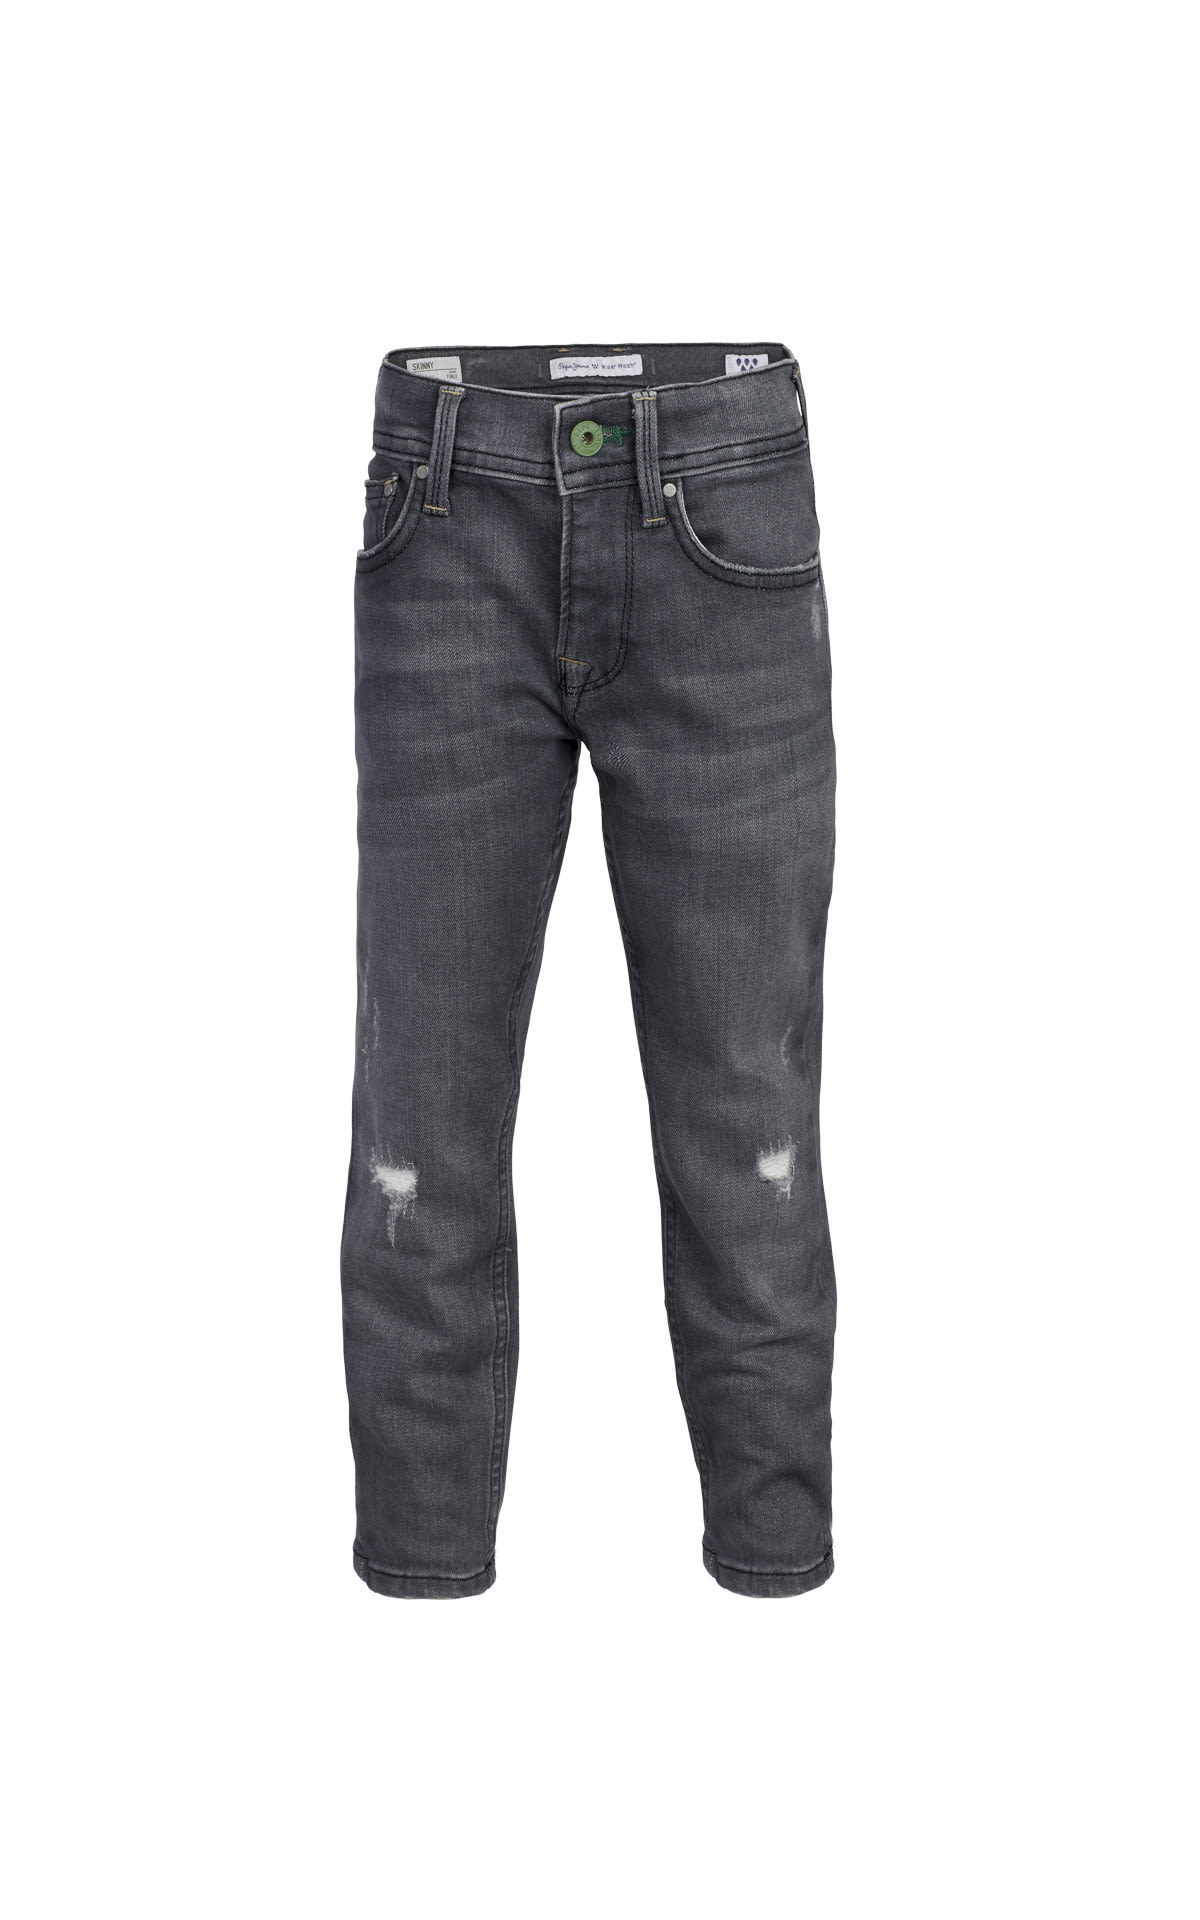 Grey jeans Pepe jeans